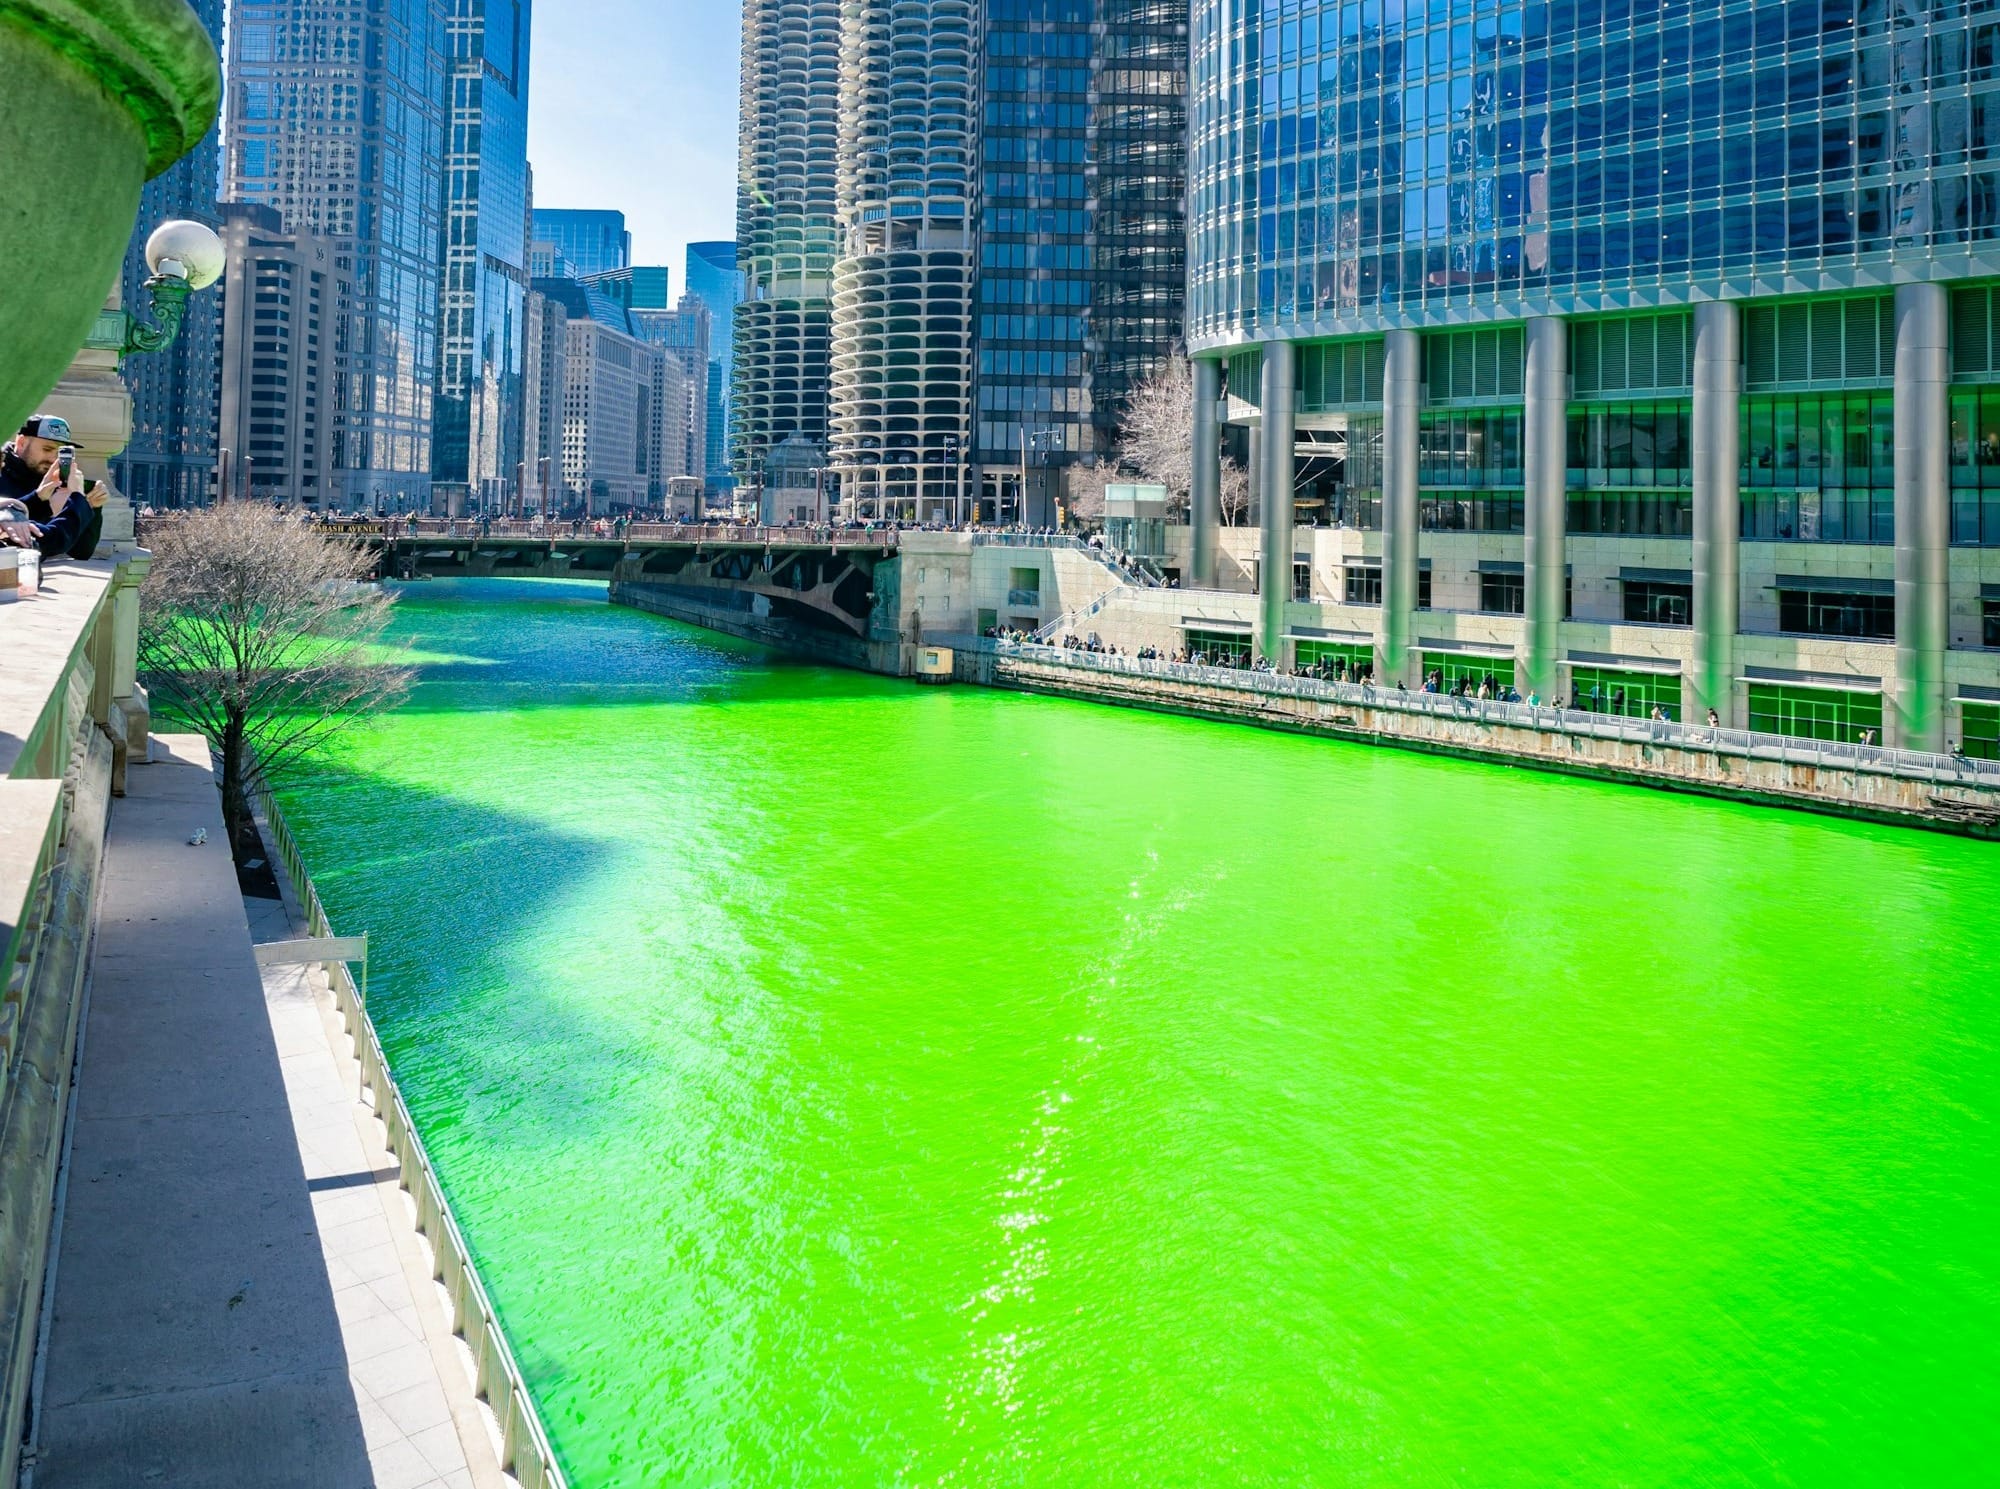 Green body of water near high rise buildings during daytime.